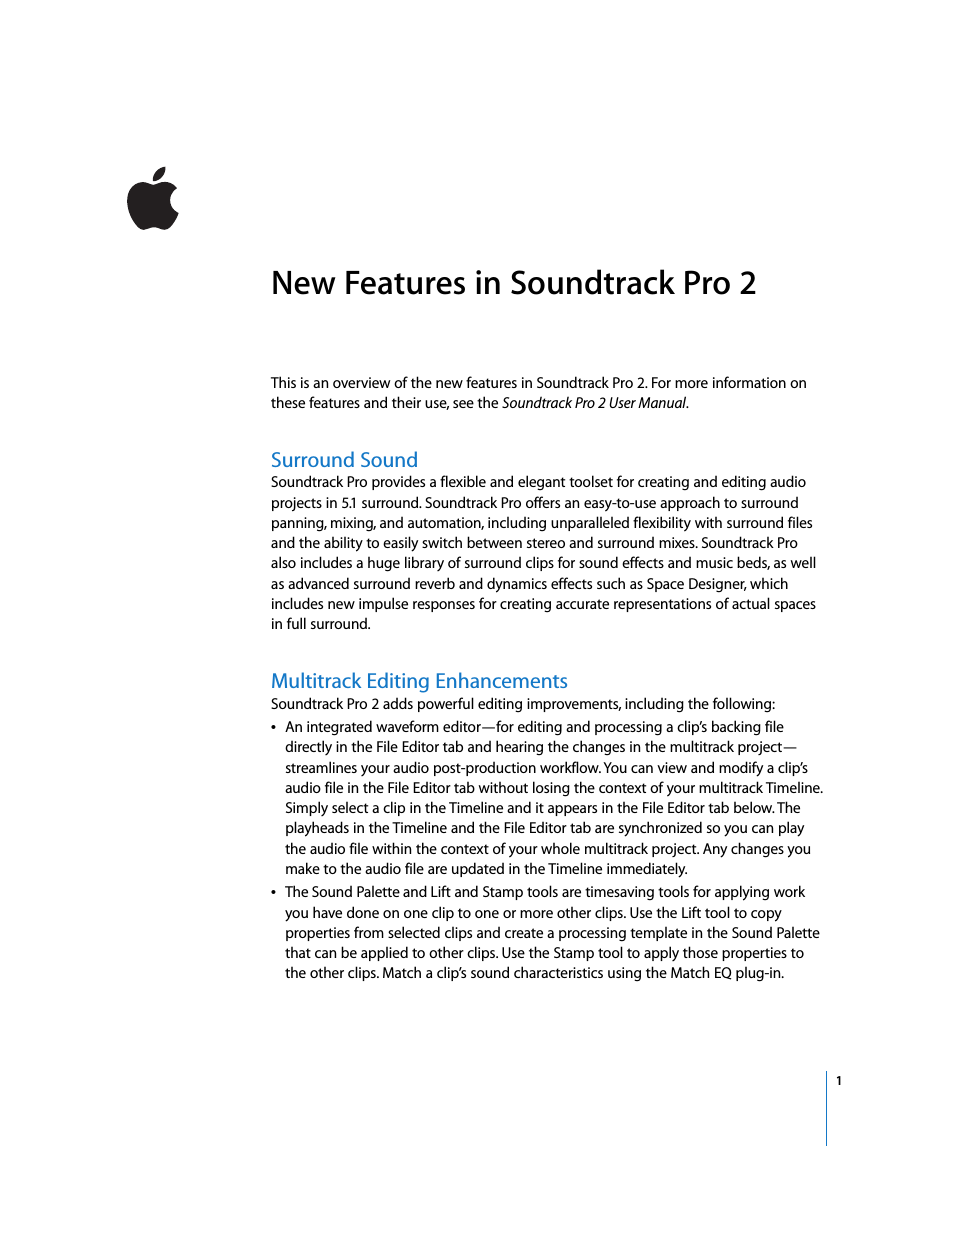 Soundtrack Pro 2 New Features